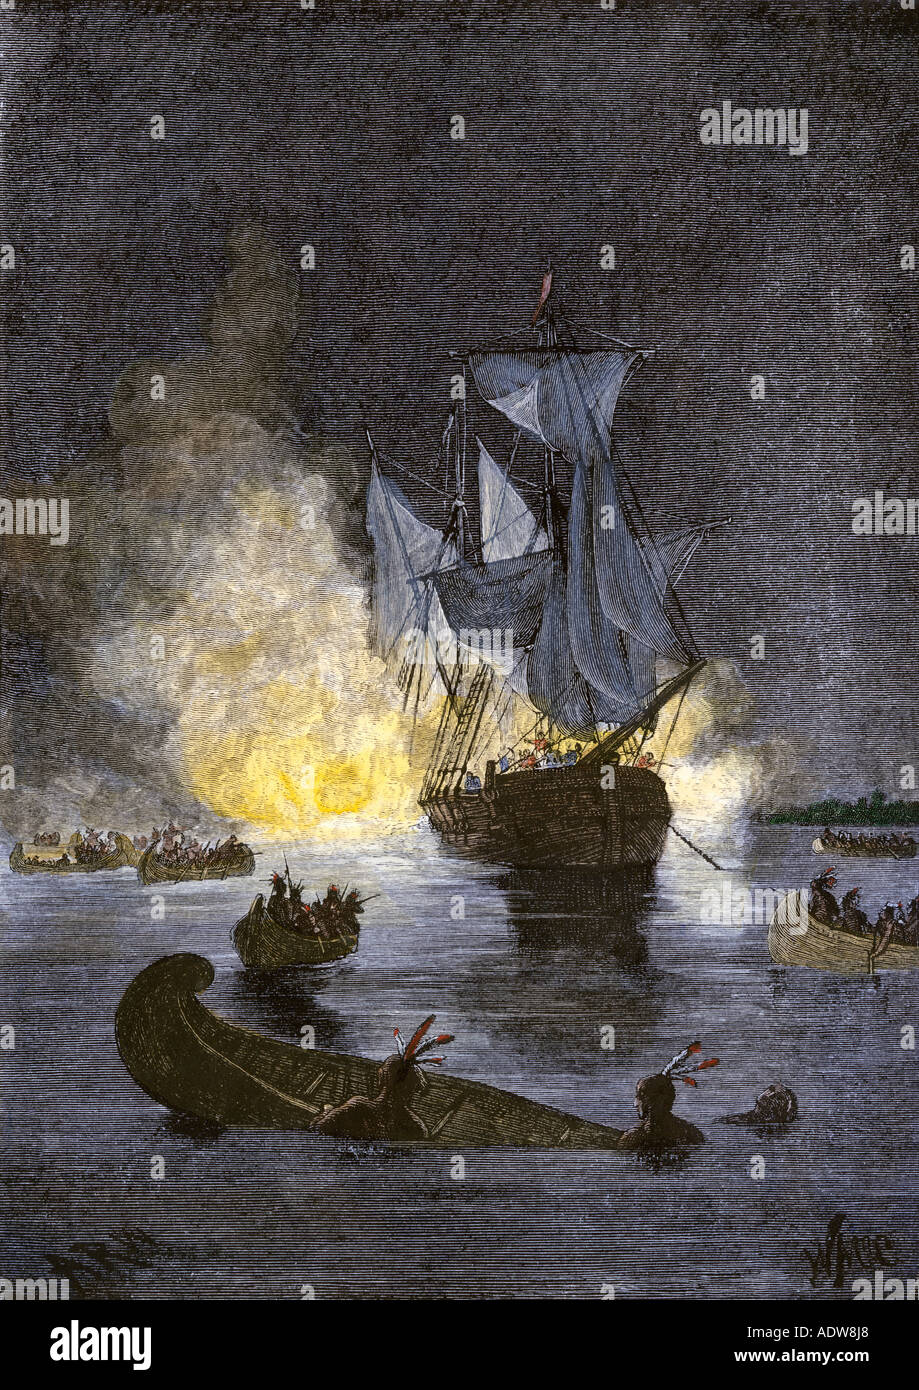 Native Americans burning a schooner in the Detroit River during Pontiacs War 1763 to 1764. Hand-colored woodcut Stock Photo